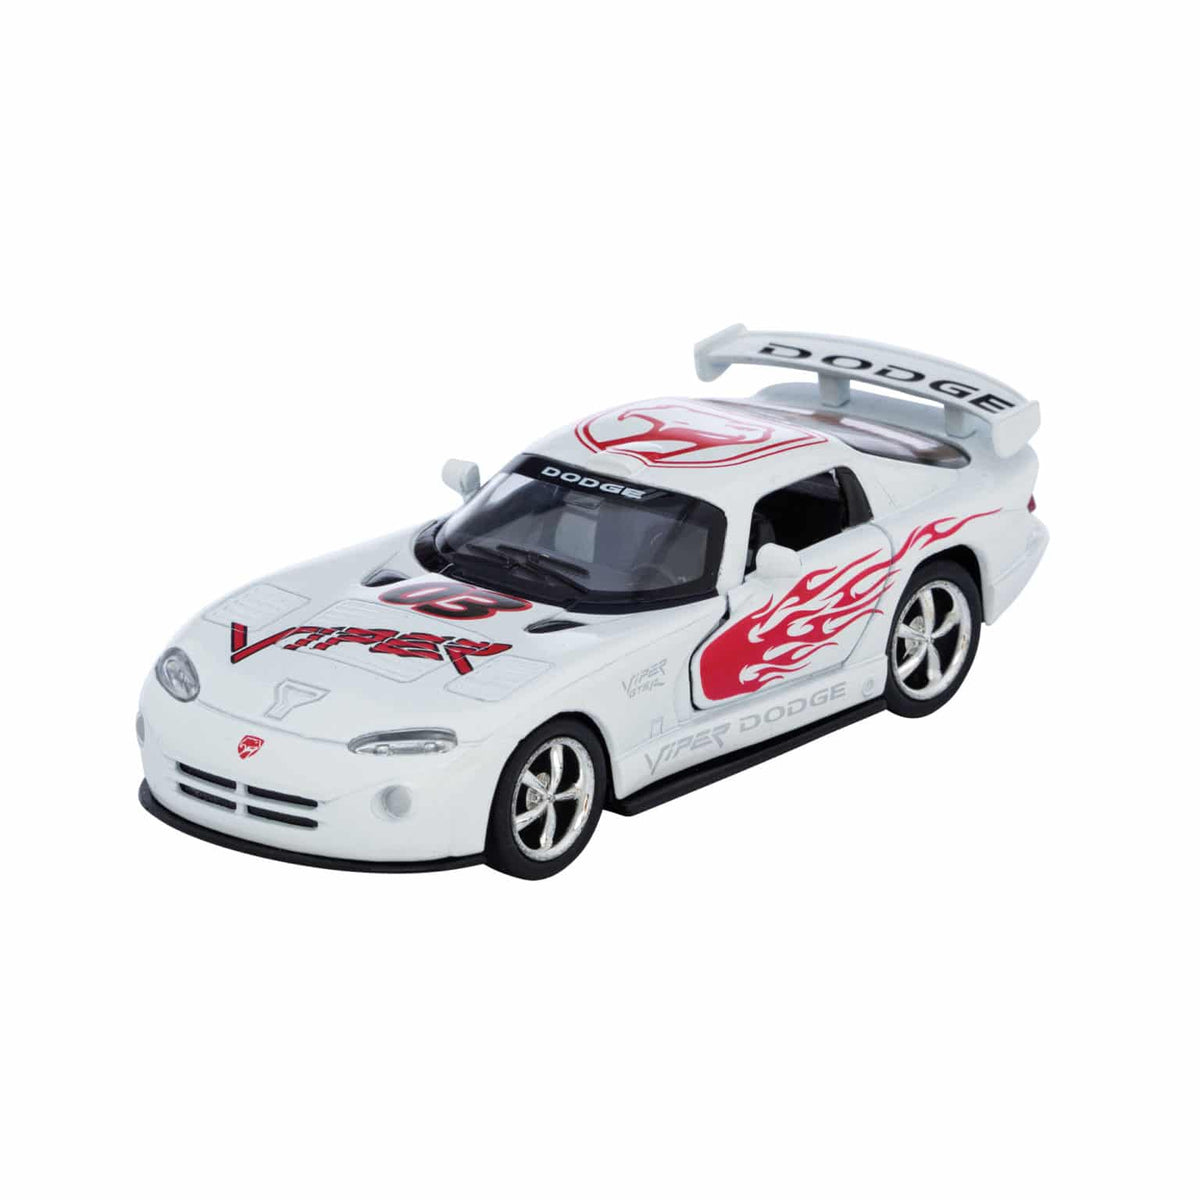 Dodge Viper-Vehicles &amp; Transportation-Yellow Springs Toy Company